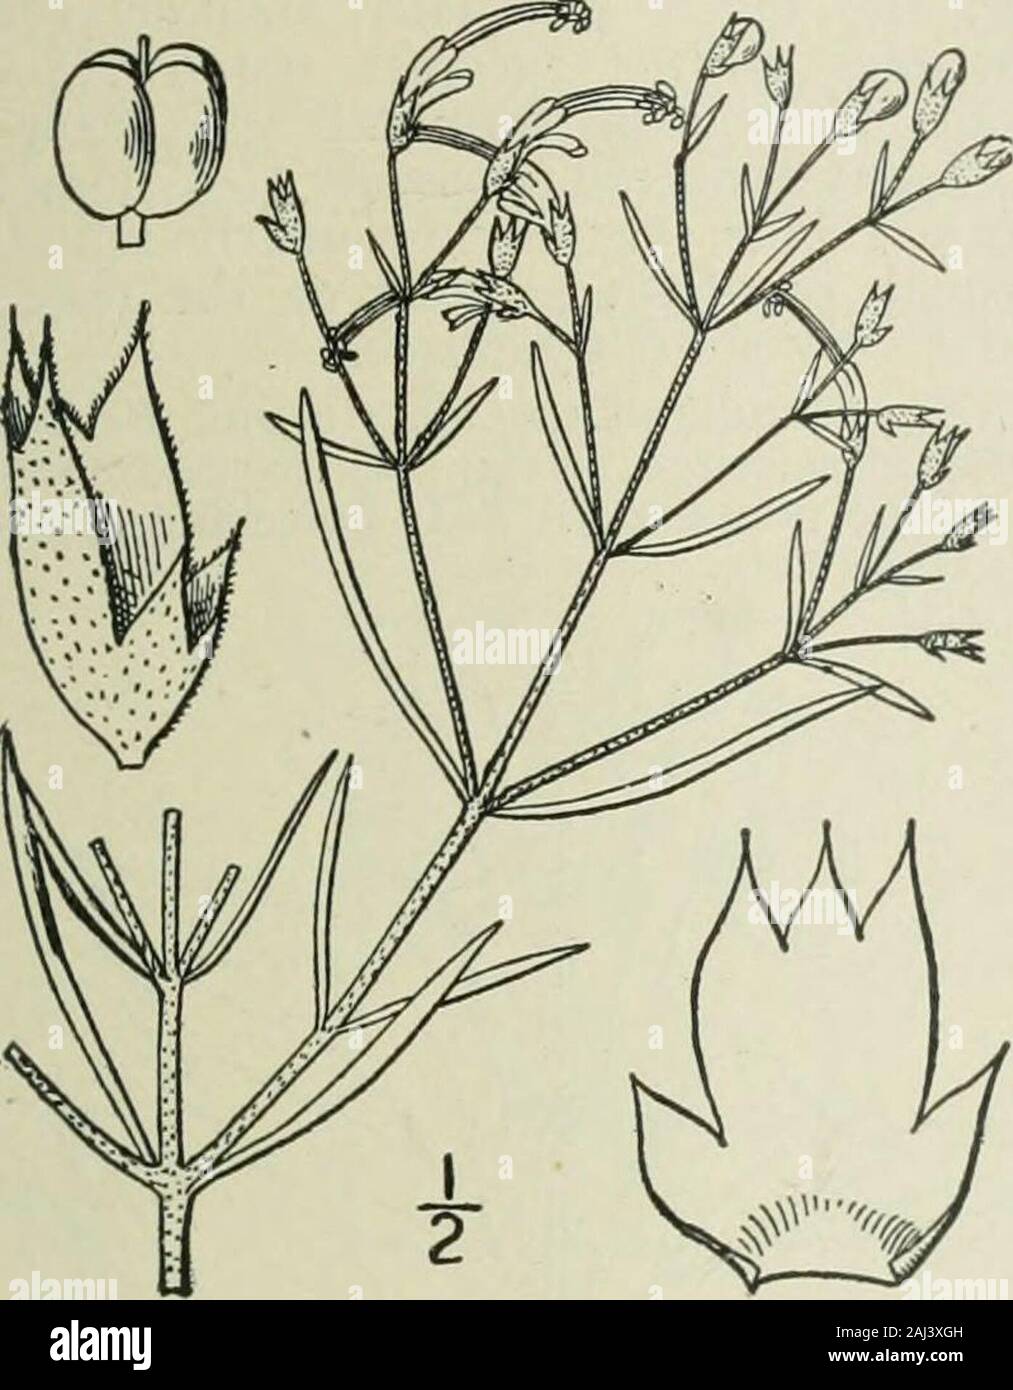 An illustrated flora of the northern United States, Canada and the British possessions : from Newfoundland to the parallel of the southern boundary of Virginia and from the Atlantic Ocean westward to the 102nd meridian . Genus 4. MINT FAMILY. 105 I. Trichostema dichotomum L Trichostema dicliotomum L. Sp. PI. 598. 1753. Annual, minutely yiscid-pubescent; stem slen-der, rather stifif, much branched, 6-2° high, thebranches spreading or ascending. Leaves oblongor oblong-lanceolate, membranous, obtuse or sub-acute at the apex, narrowed at the base into shortpetioles, 1-3 long, 3-io wide, the upper Stock Photo